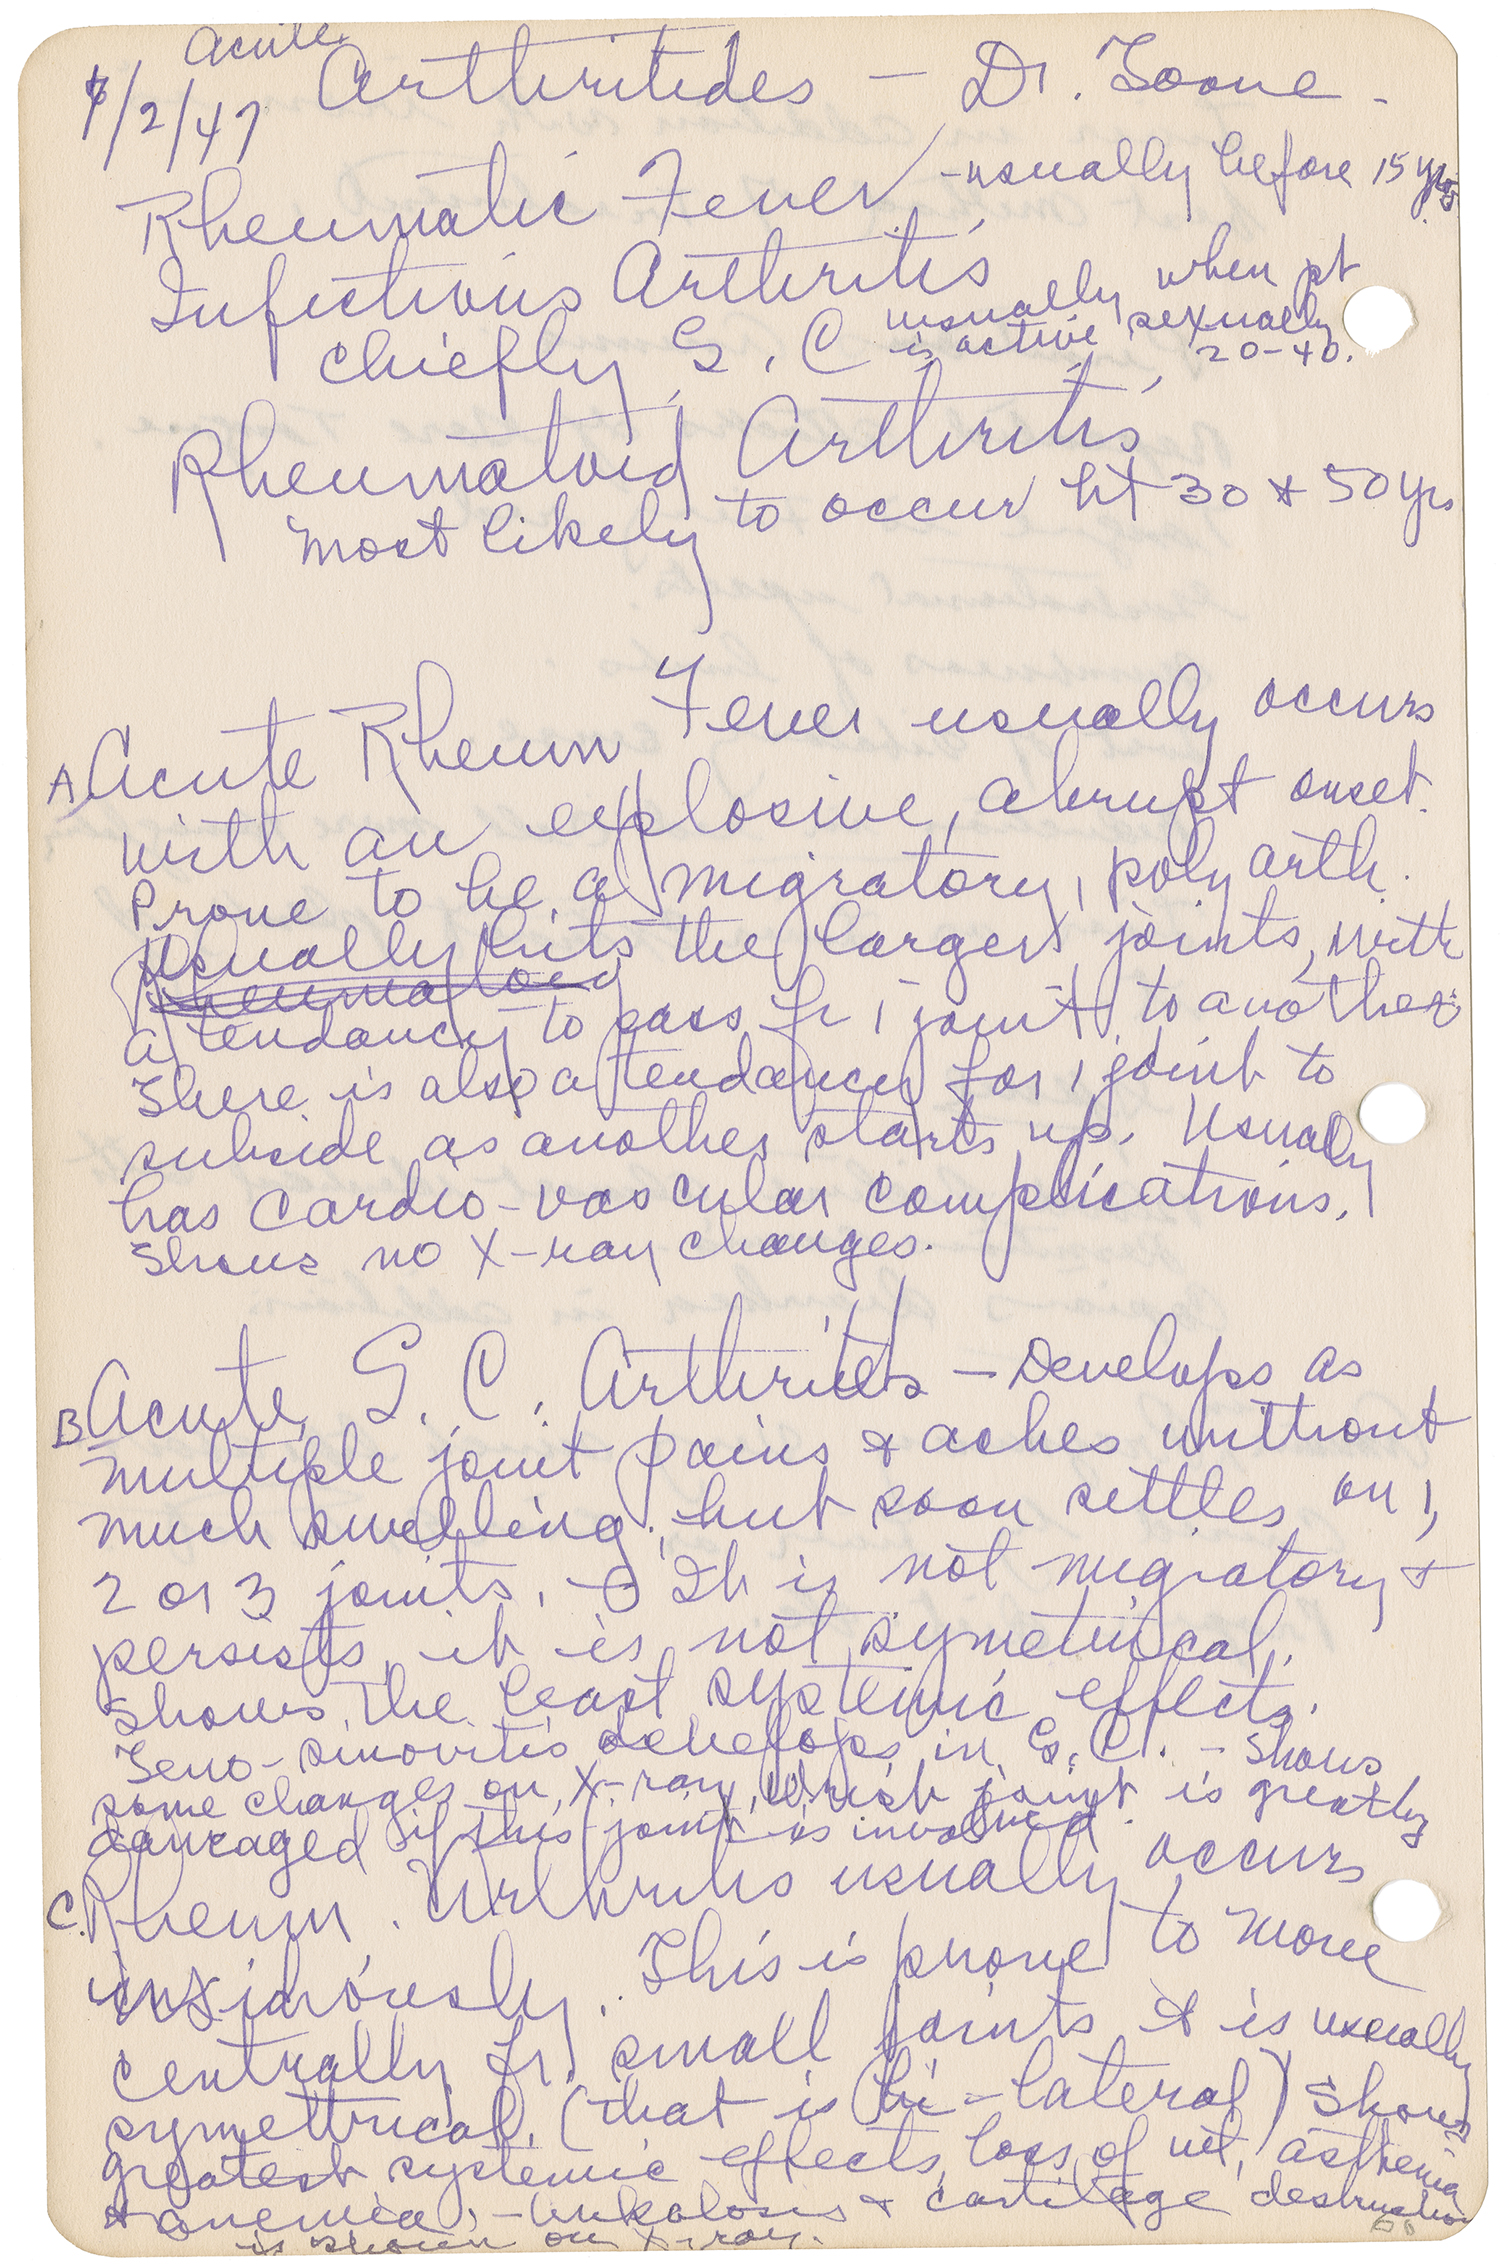 A page from Dr. Gilpin's medical notebook